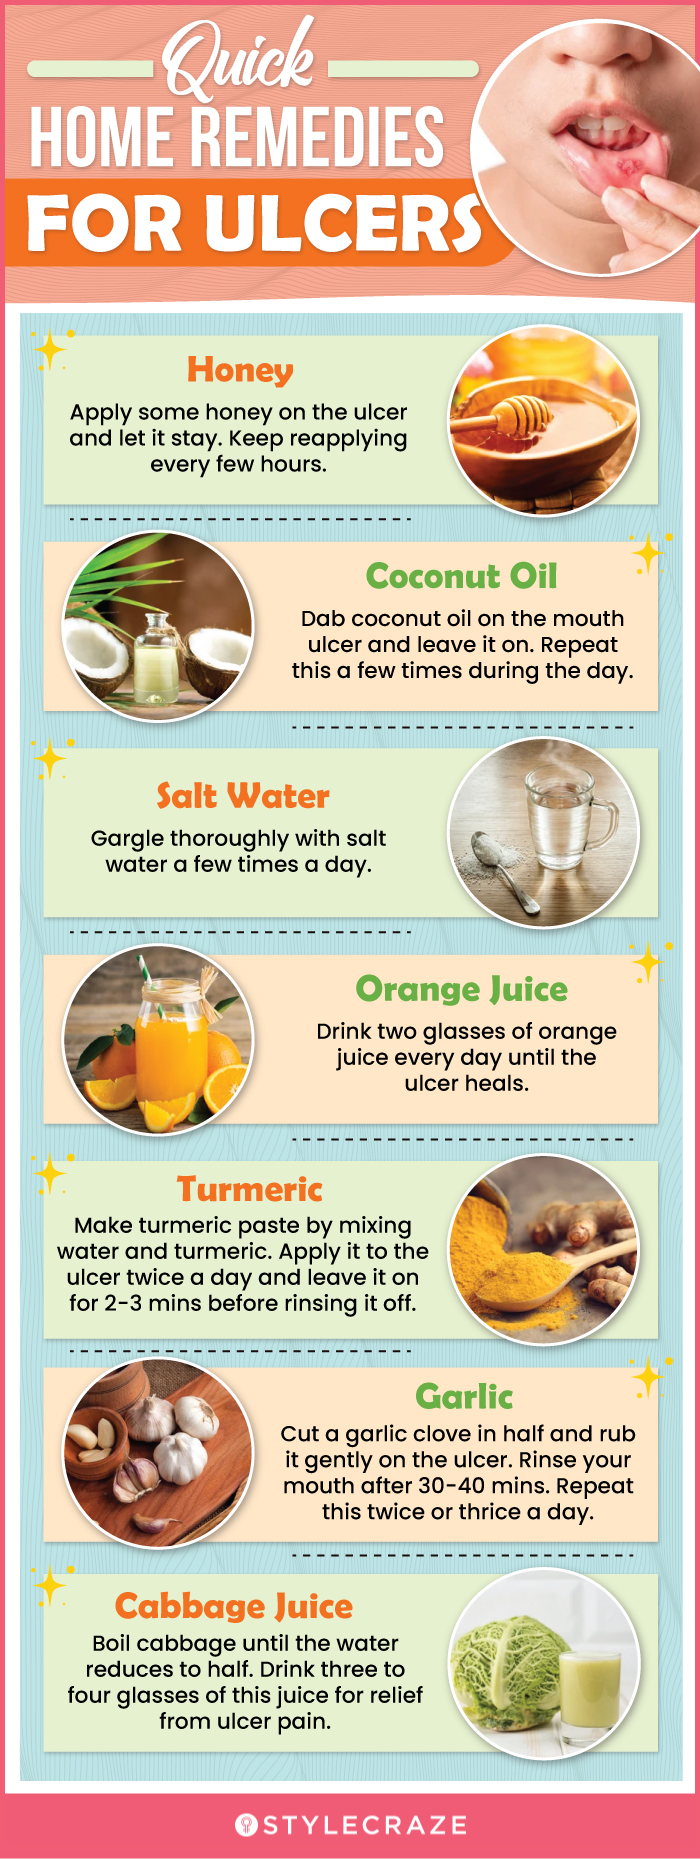 quick home remedies for ulcers [infographic]